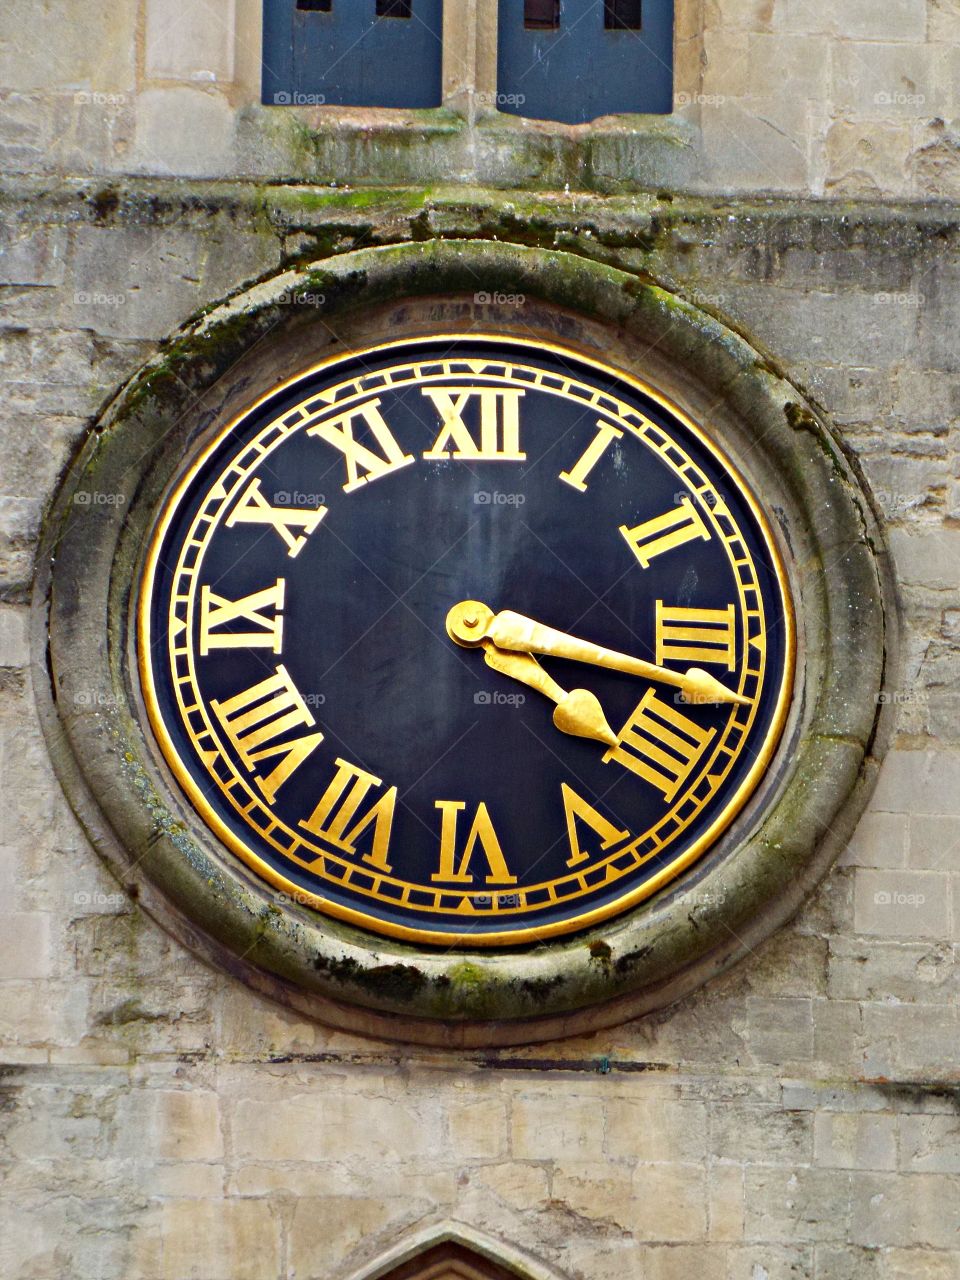 Cathedral Clock